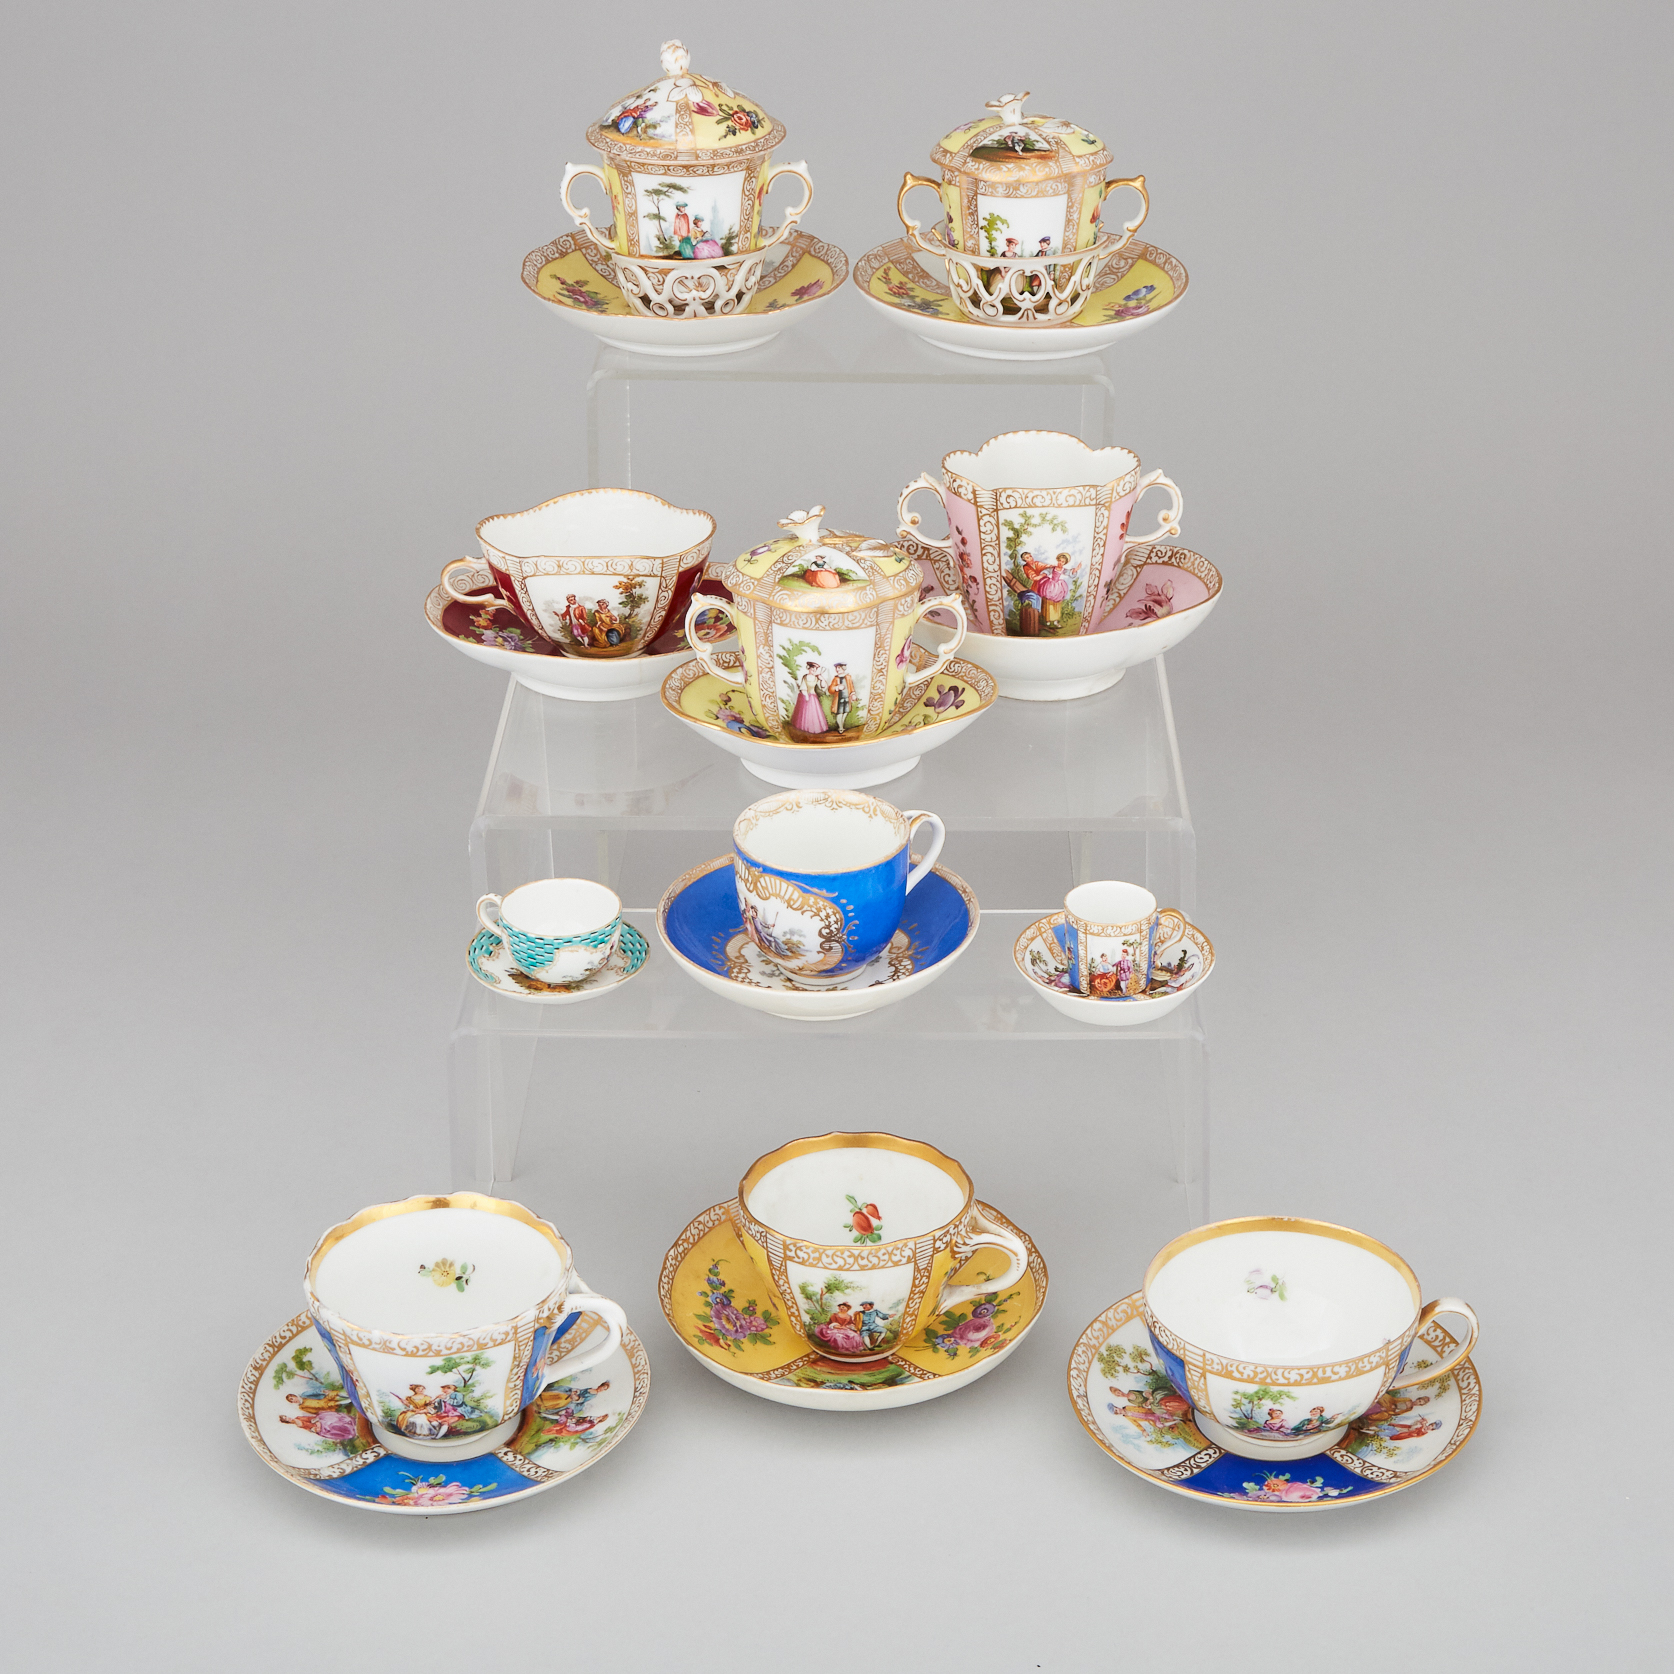 Eleven Various Dresden Cups and Saucers, late 19th/early 20th century